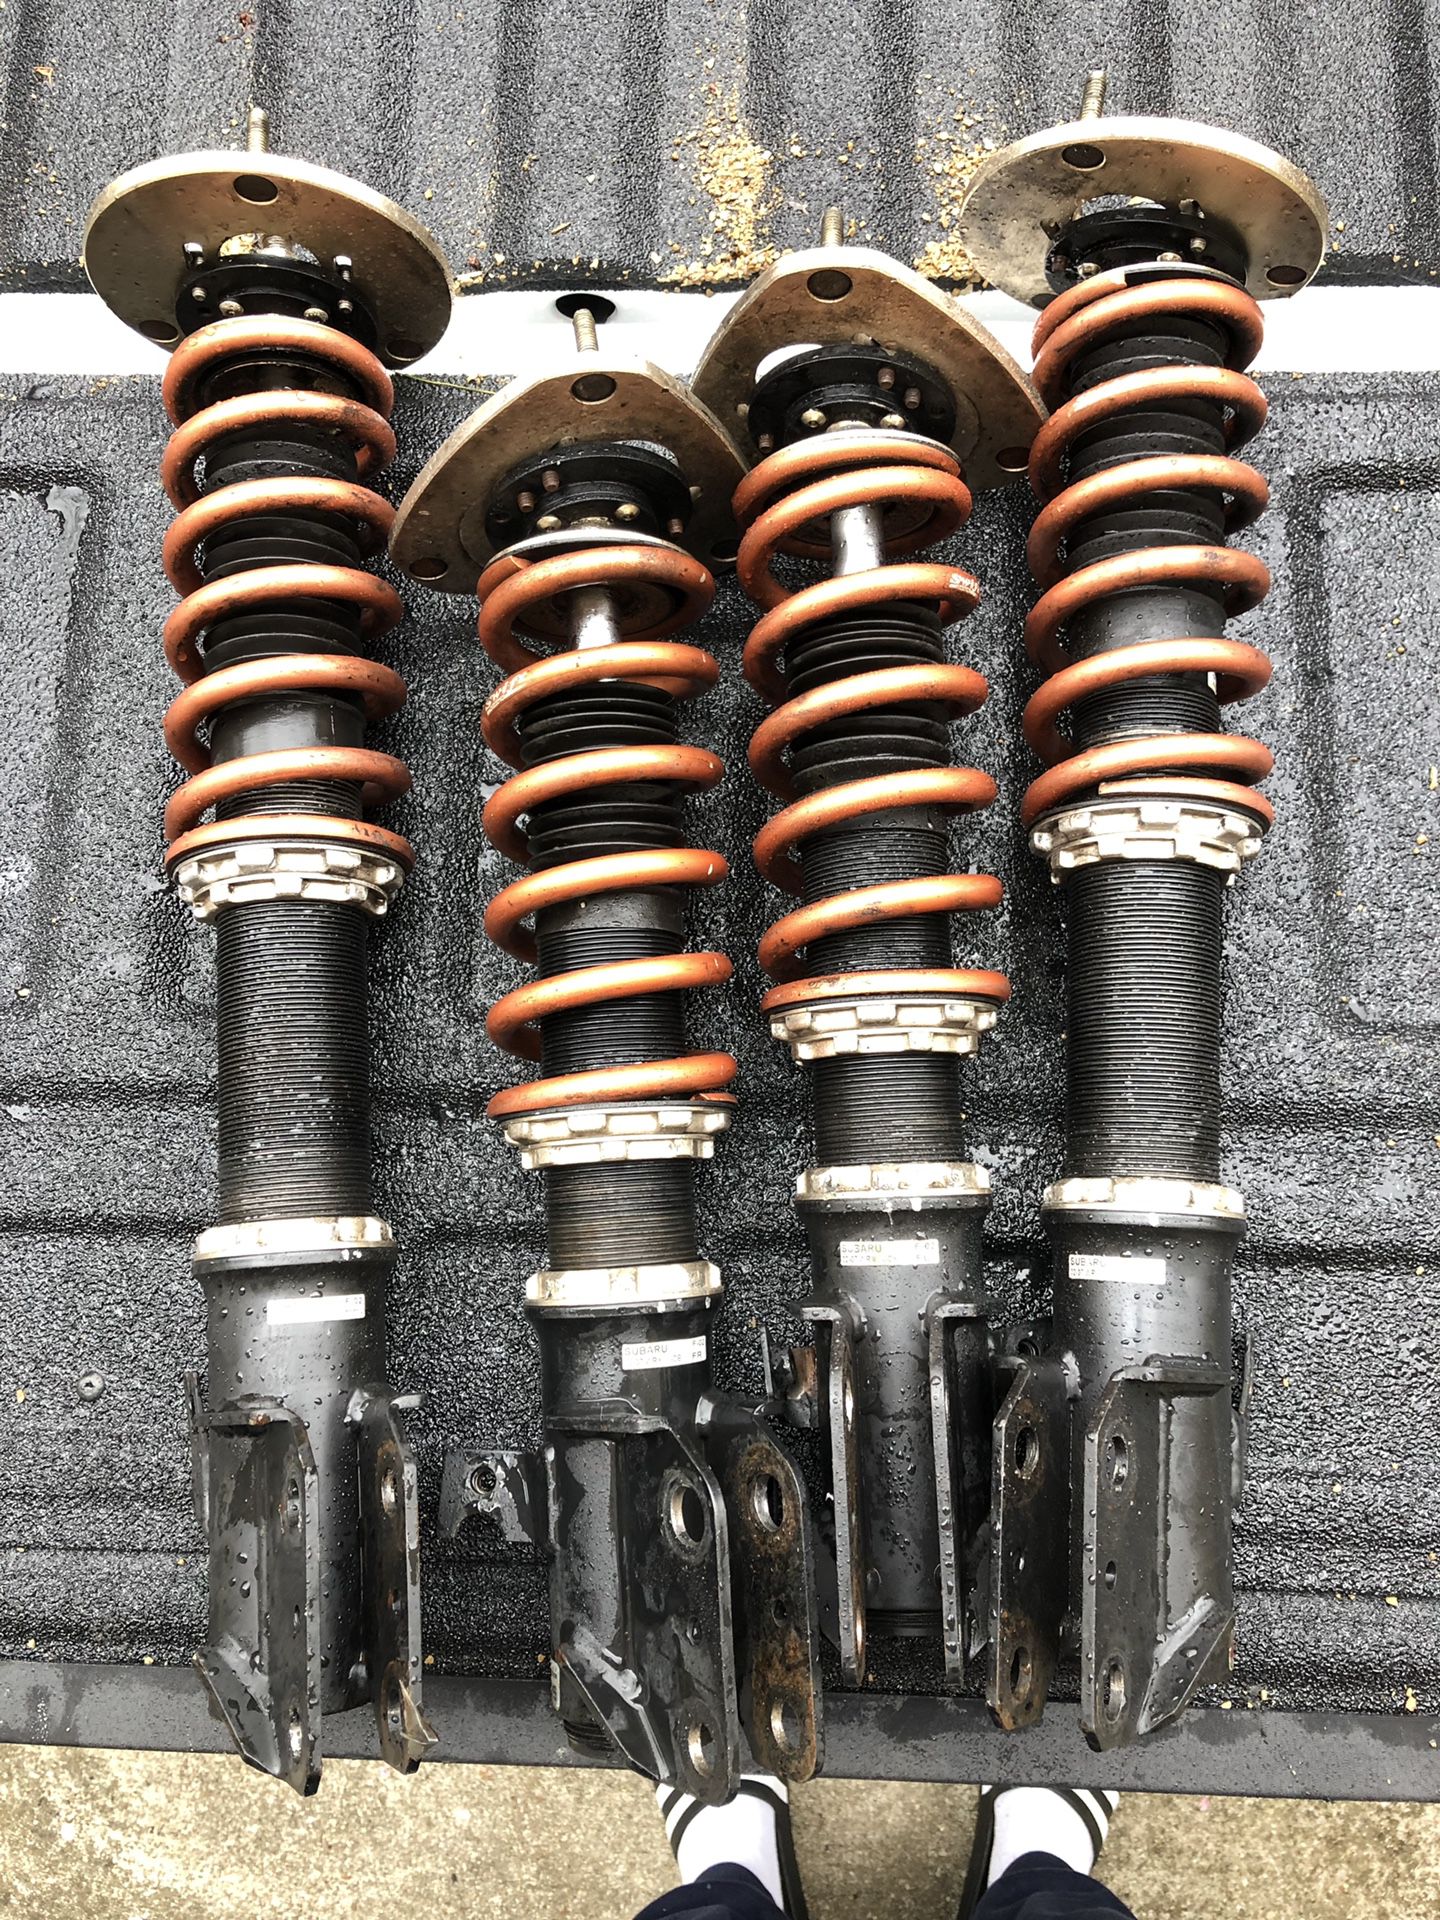 Bc-br coilovers wrx/sti 02-07 w/swift springs camber plates front/rear EXCELLENT